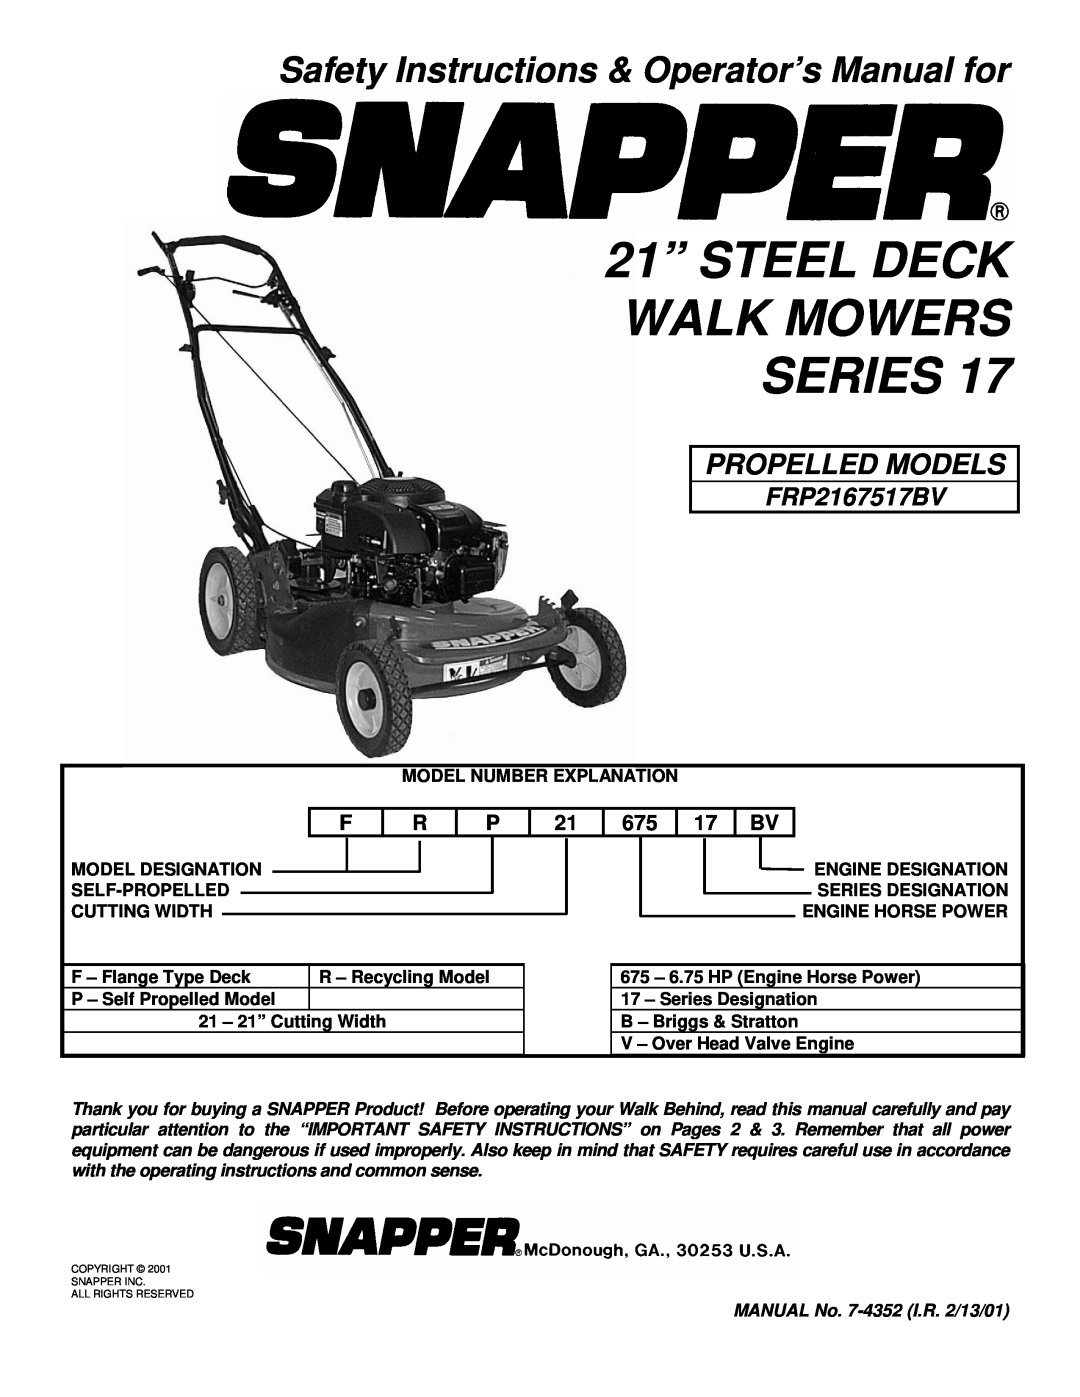 Snapper FRP2167517BV important safety instructions 21” STEEL DECK WALK MOWERS SERIES, Propelled Models 